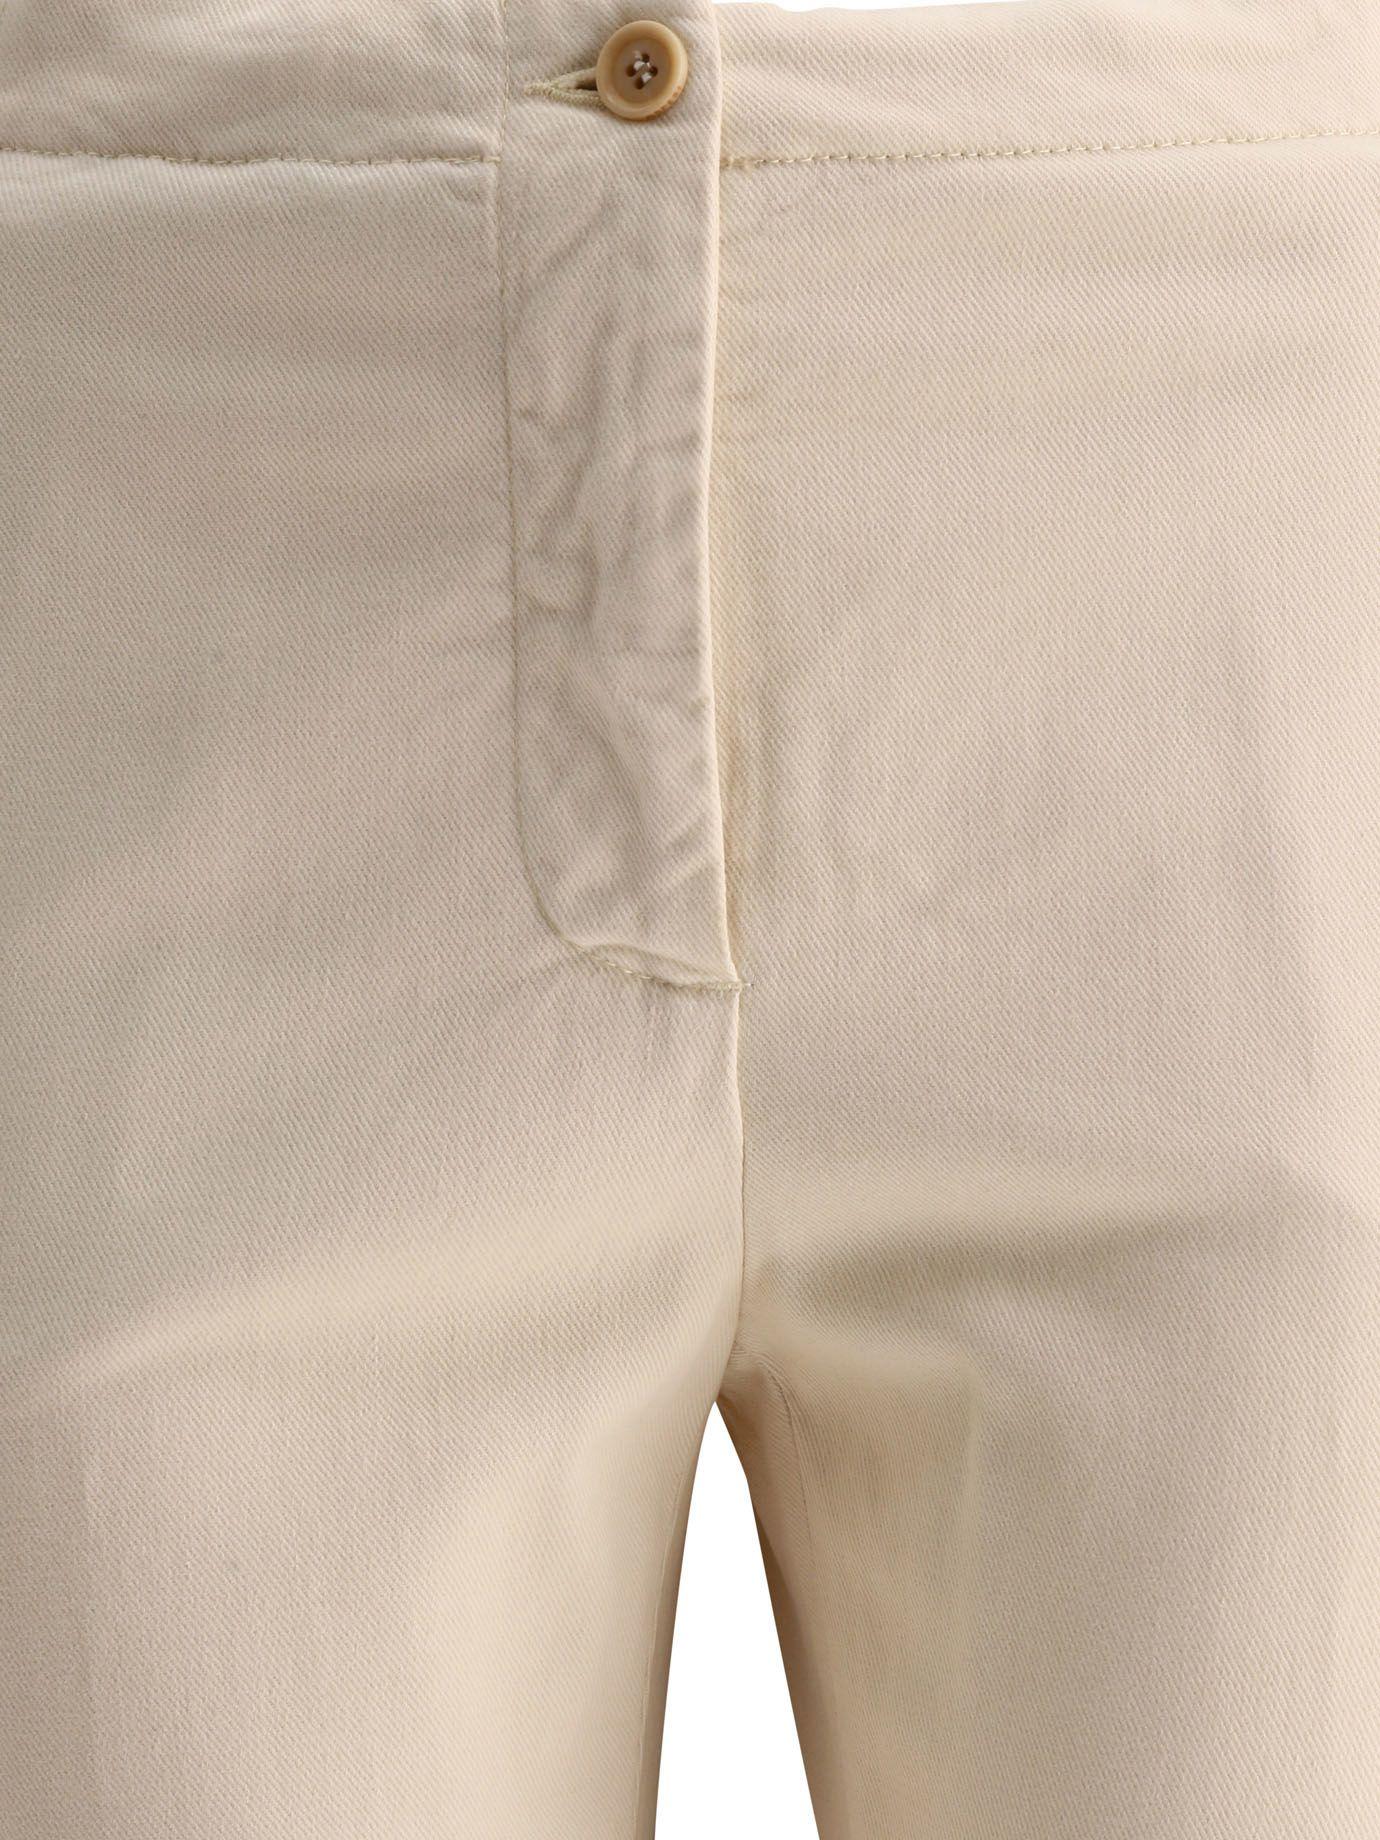 Aspesi Brushed Cotton Trousers in Beige Natural - Save 37% Womens Trousers Slacks and Chinos Aspesi Trousers Slacks and Chinos 